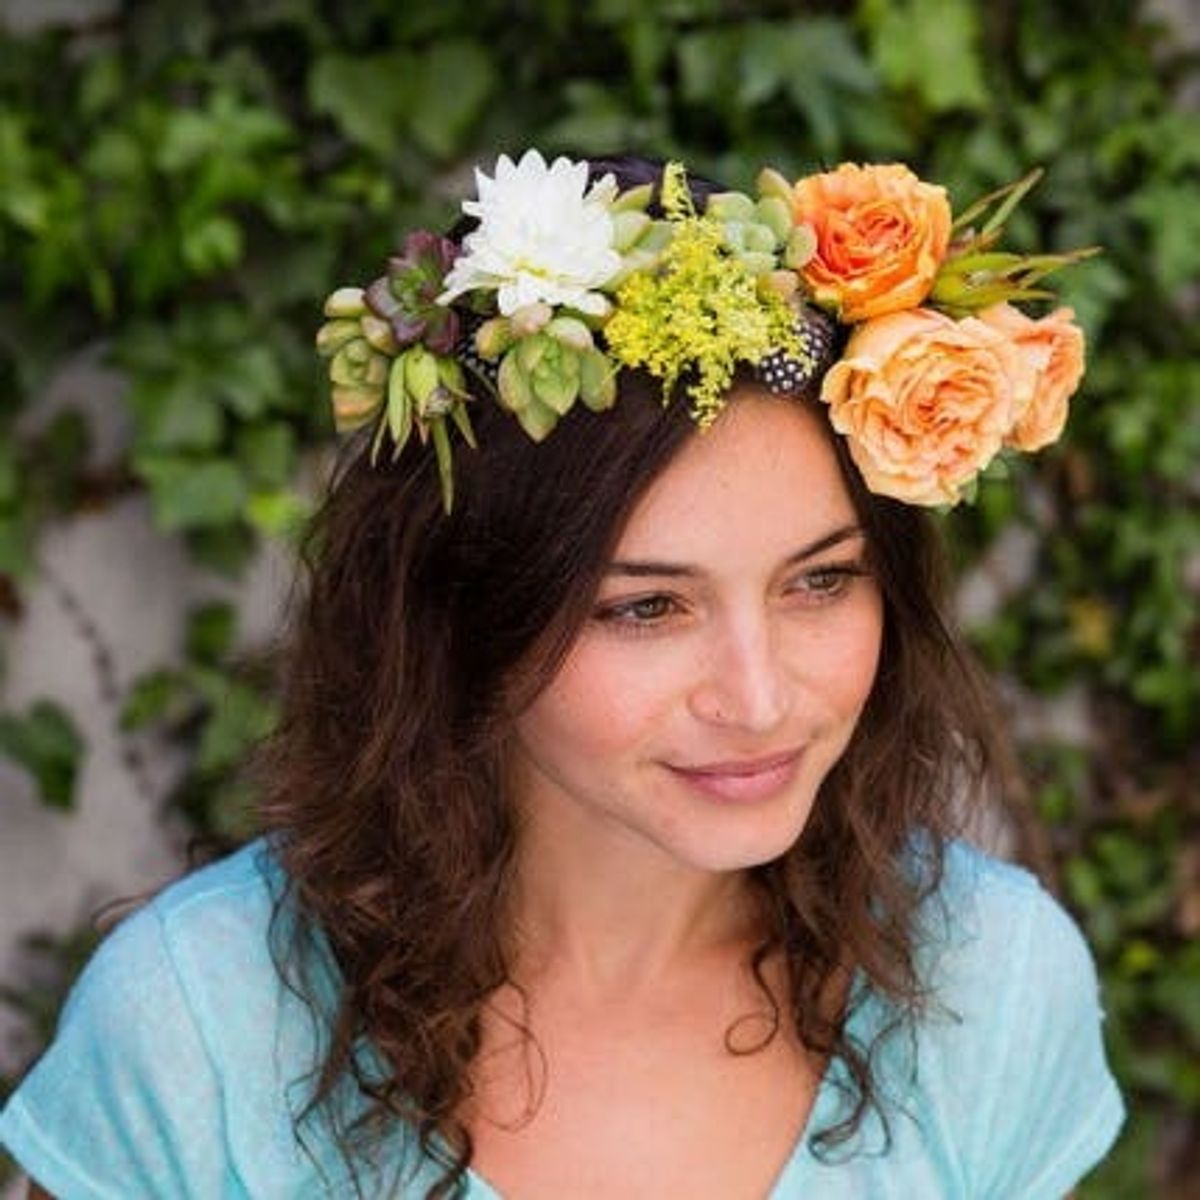 13 Boho Gifts for Your Bridemaids